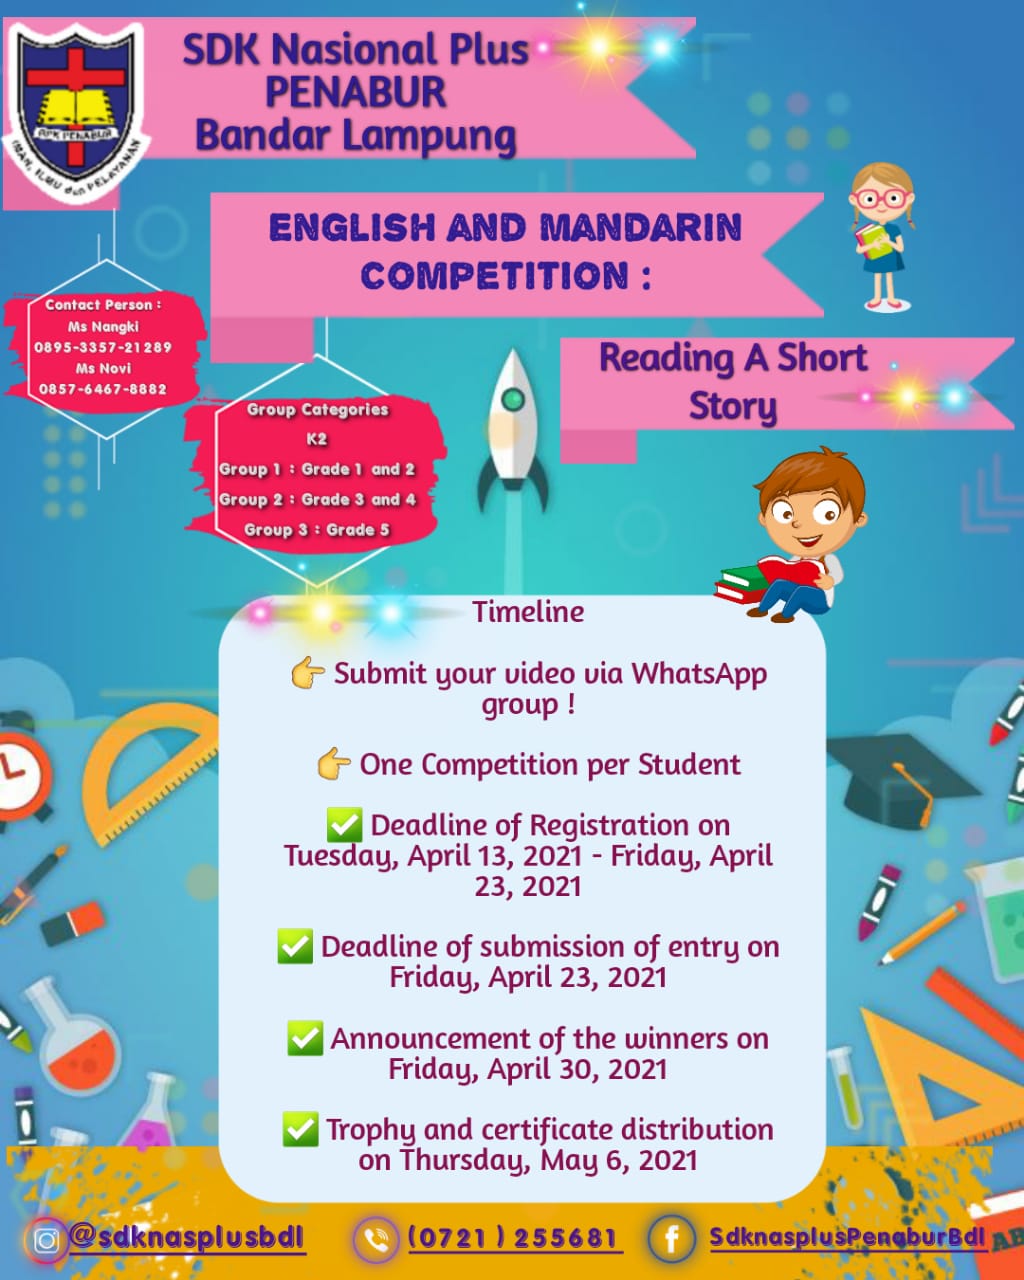 English and Mandarin Competition : Reading a Short Story